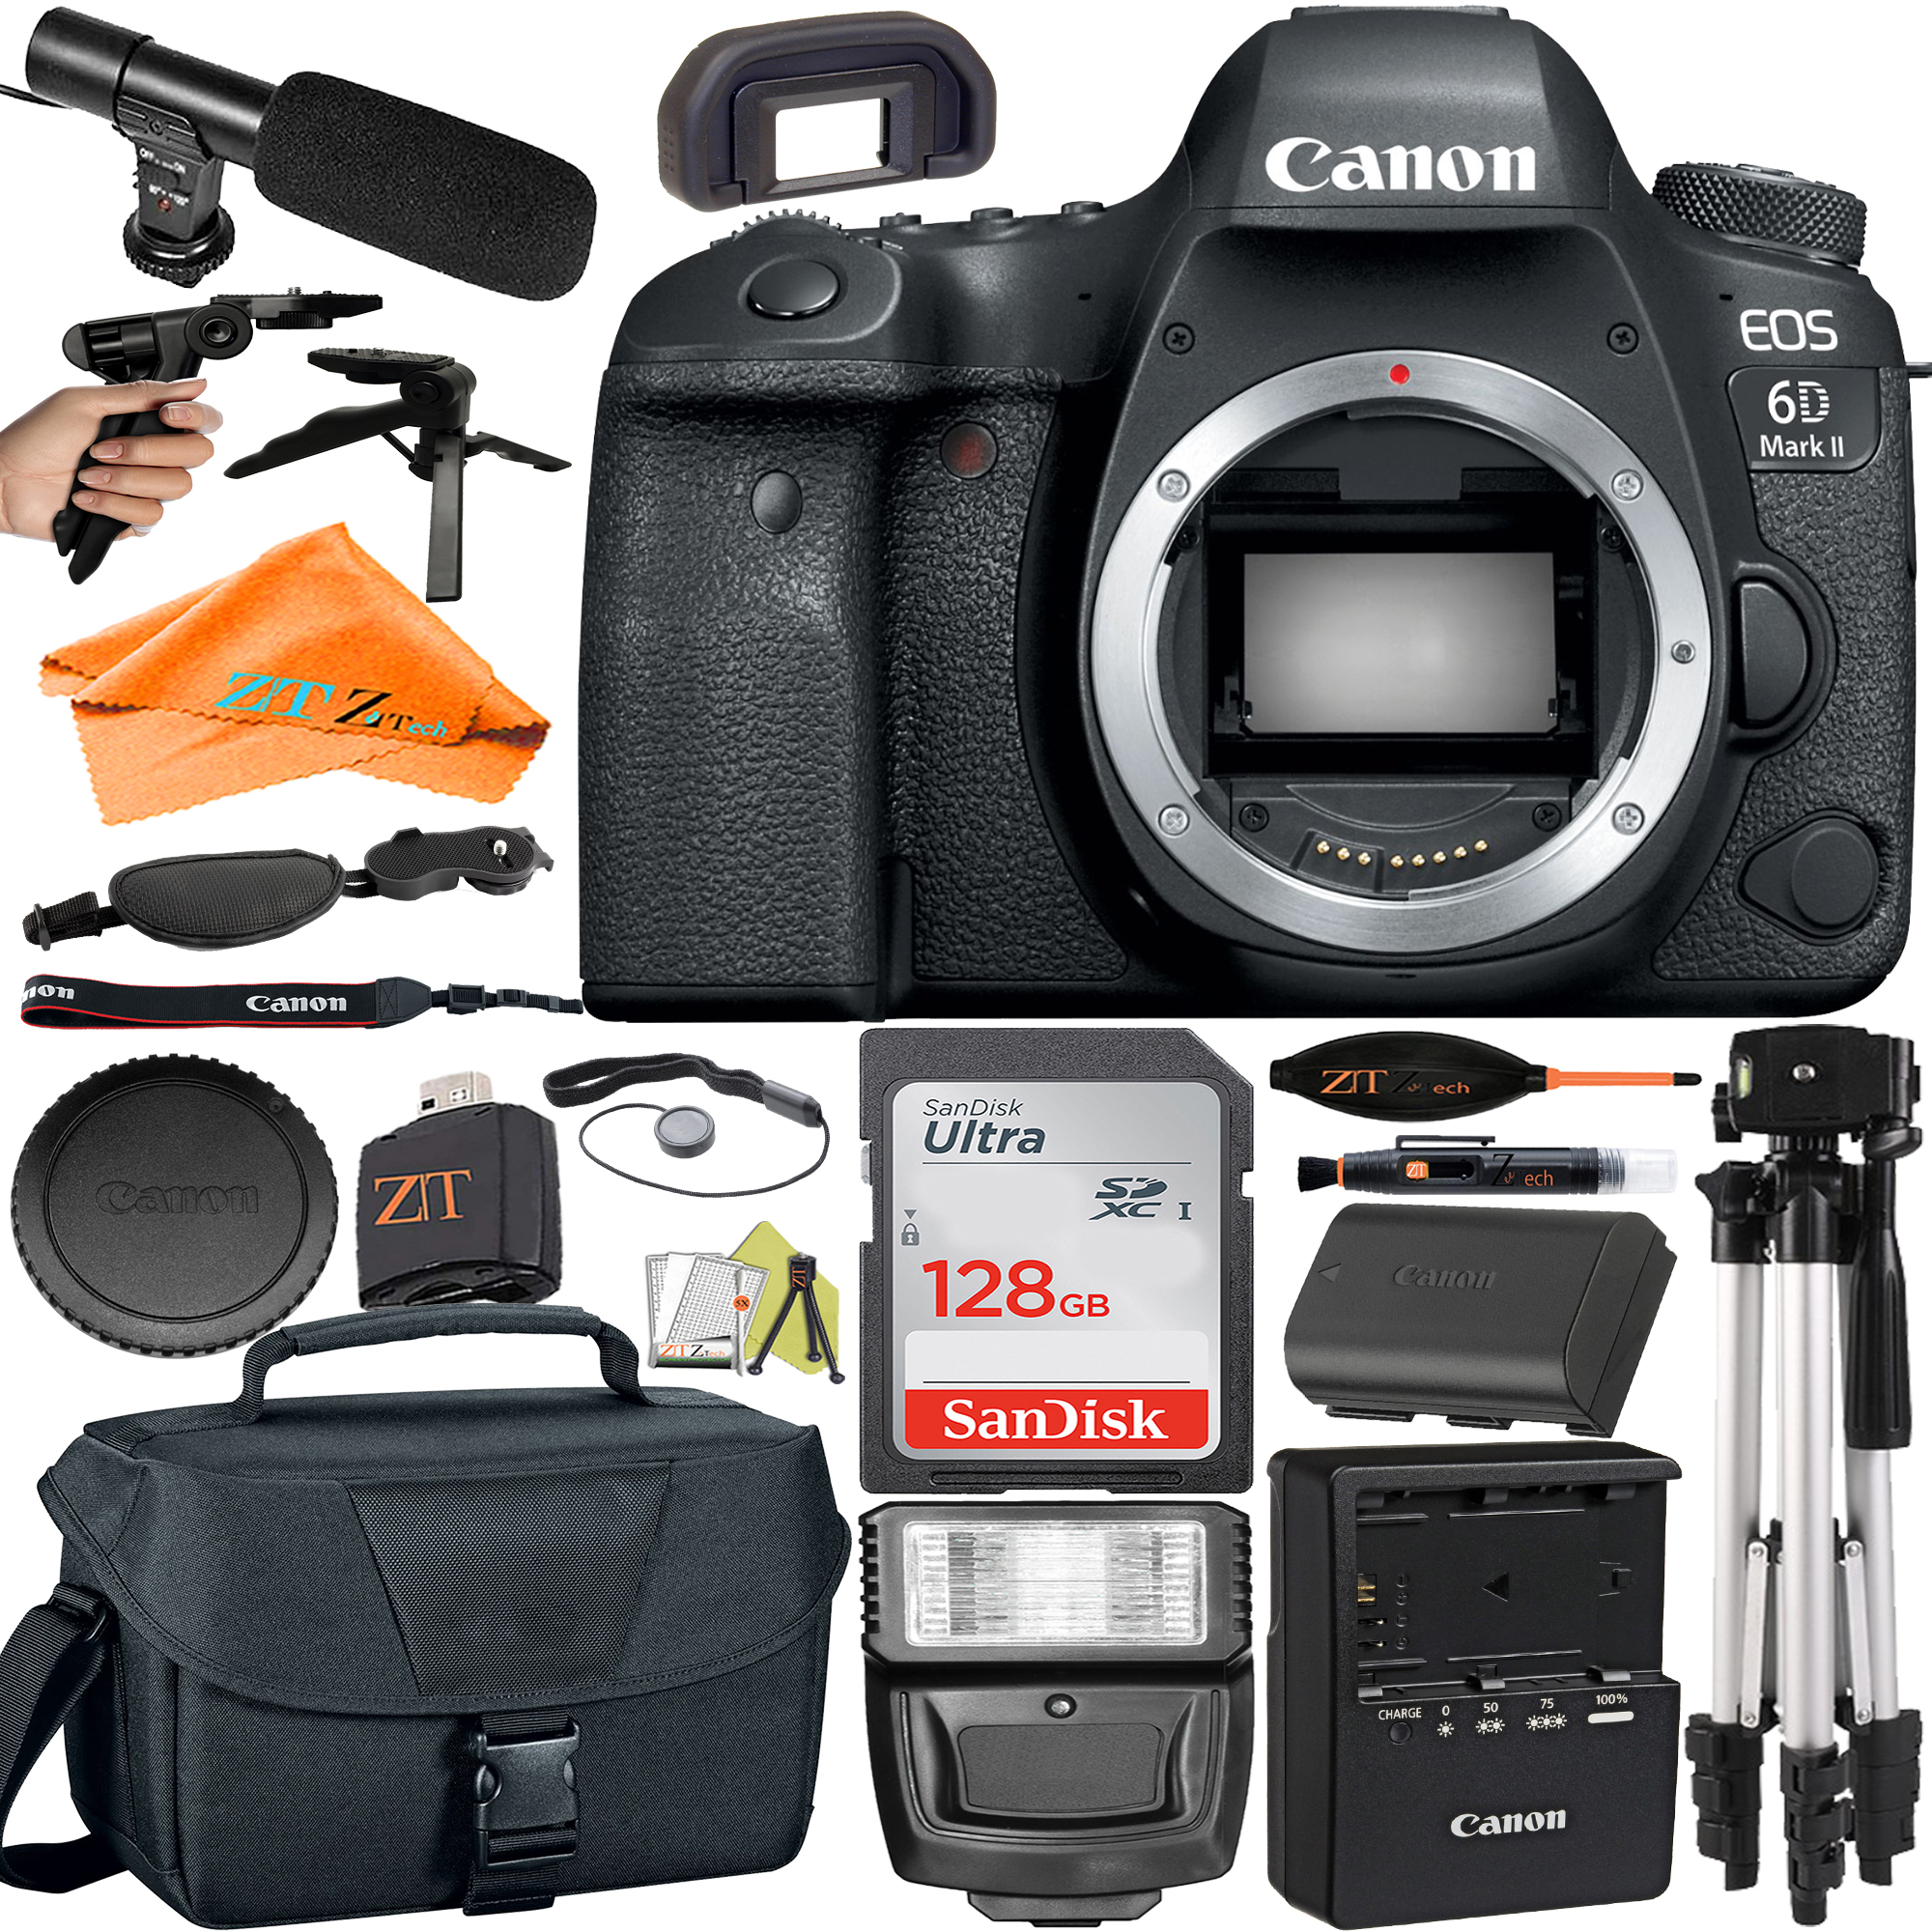 Canon EOS 6D Mark II DSLR Camera (Body Only) with SanDisk 128GB + Microphone + Case + ZeeTech Accessory Bundle